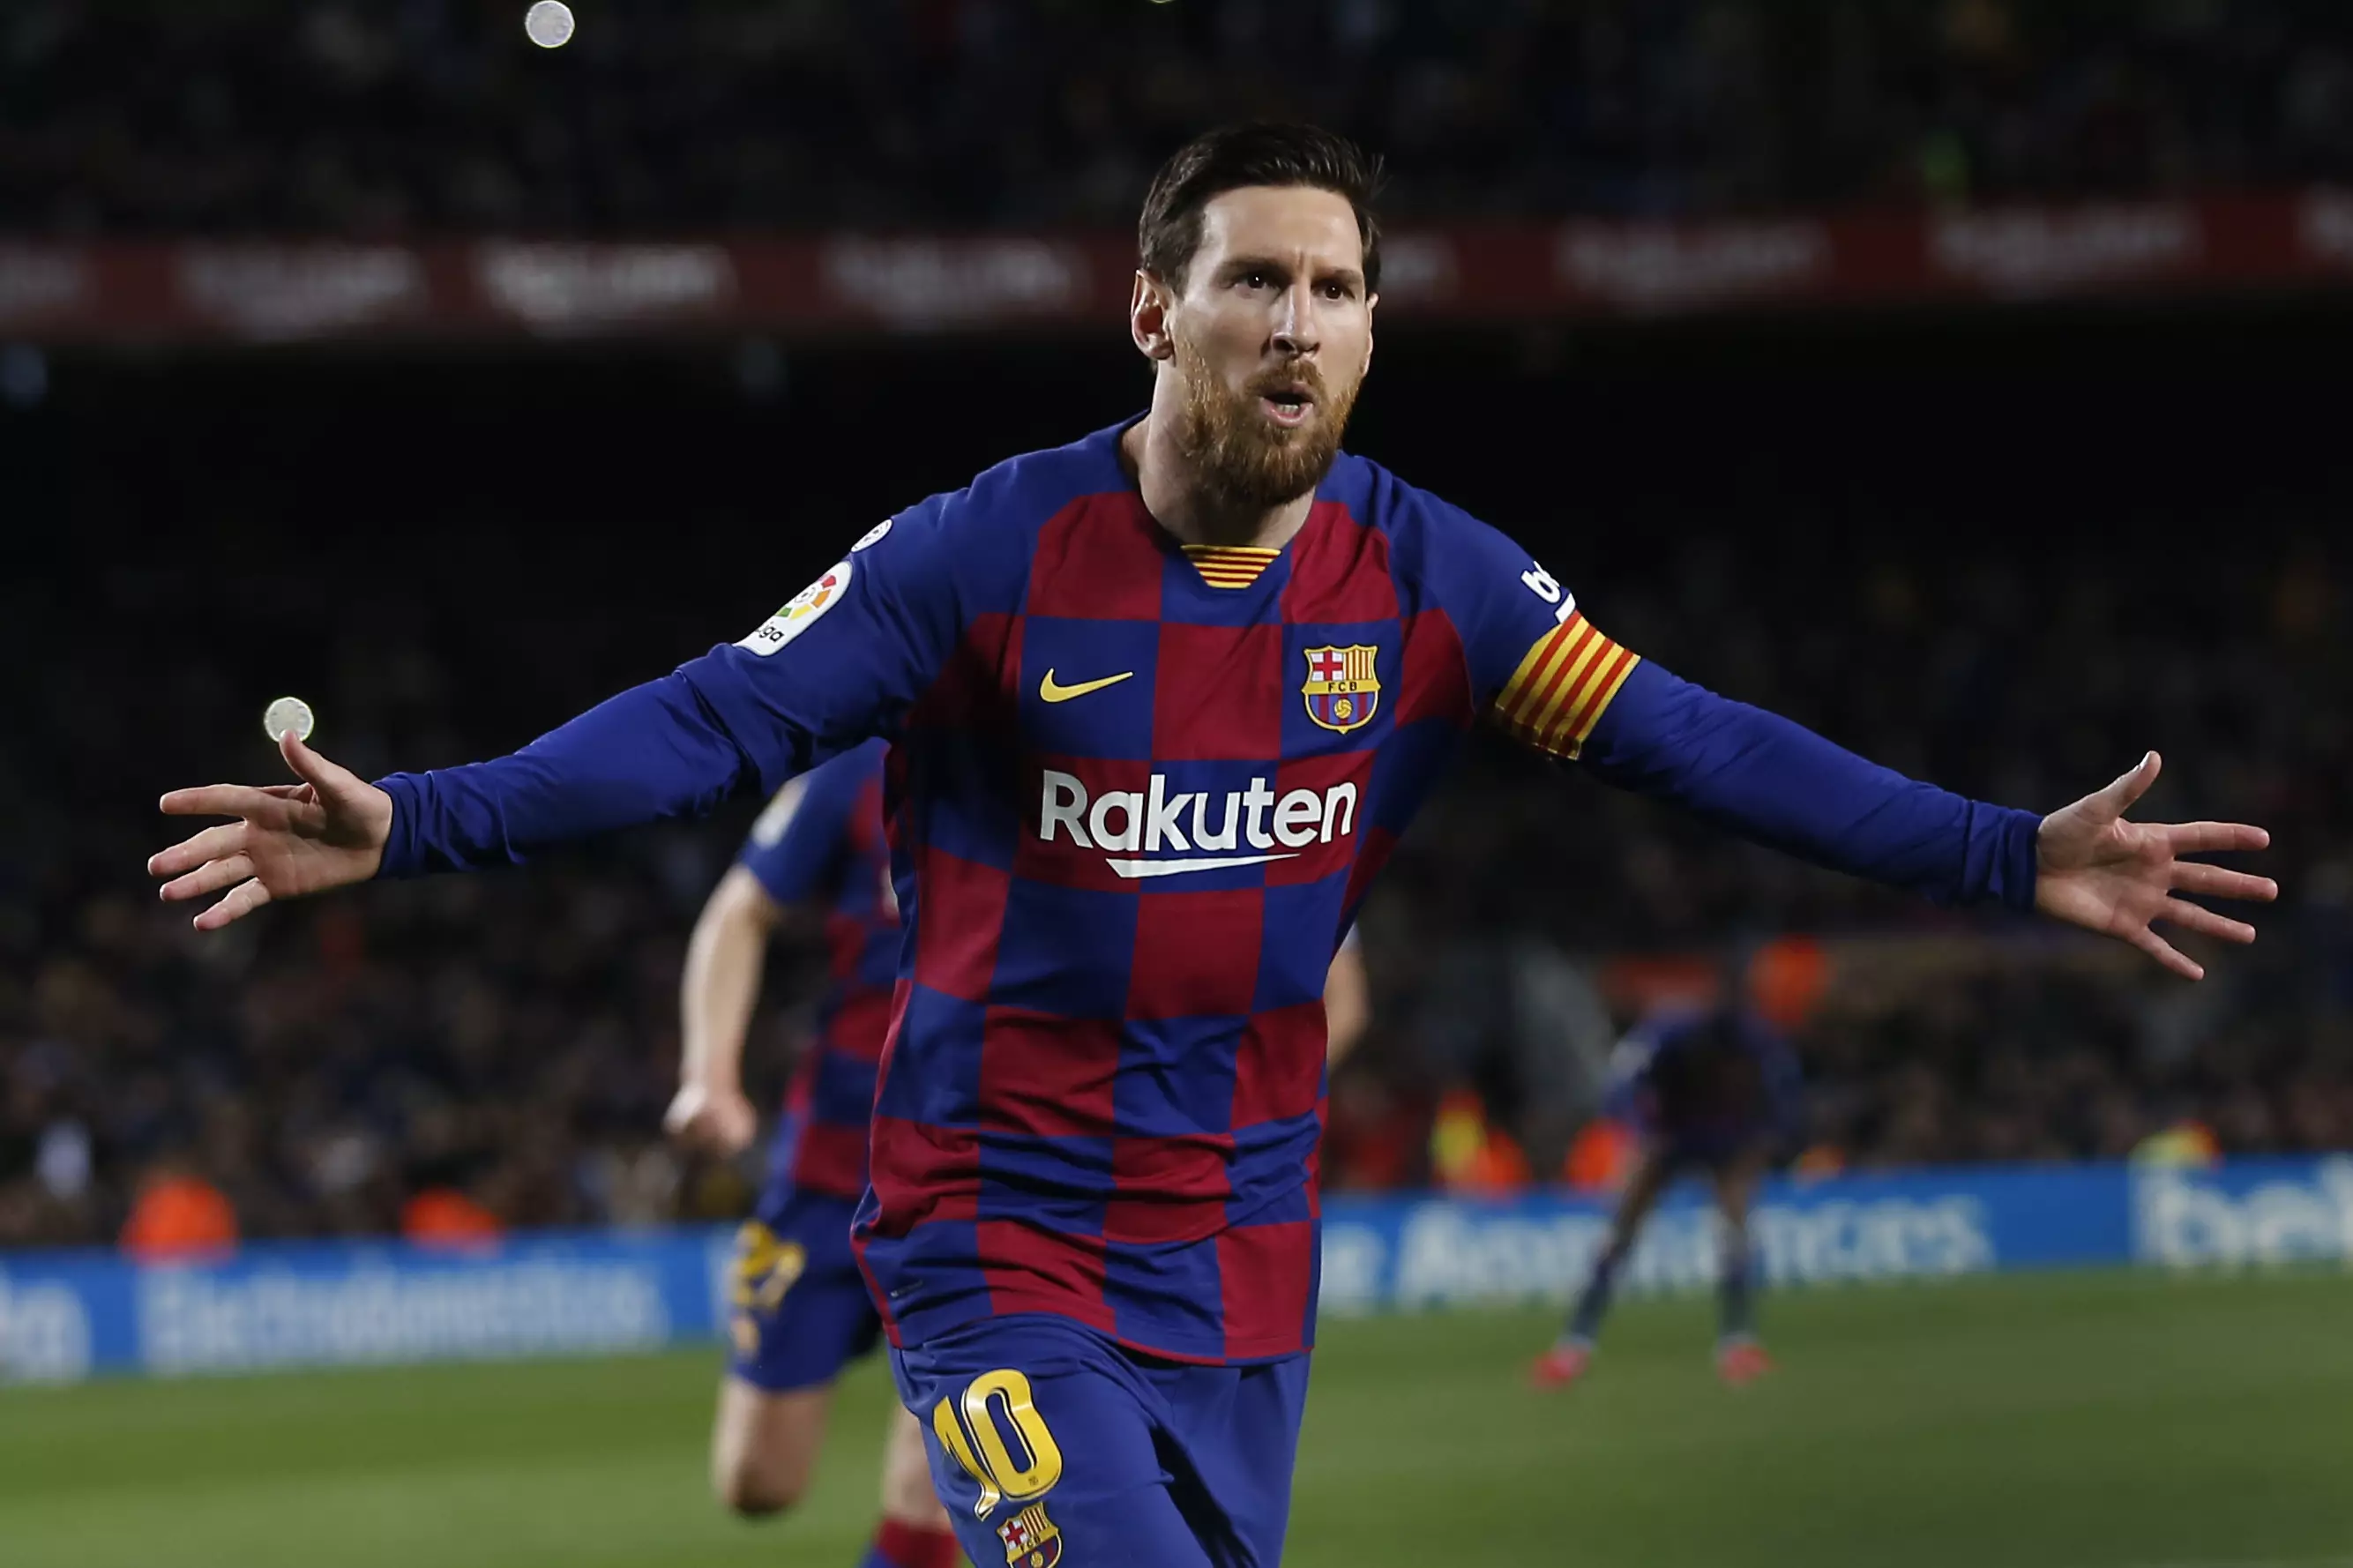 Lionel Messi looks set to leave Barcelona after a decorated 16-year career.